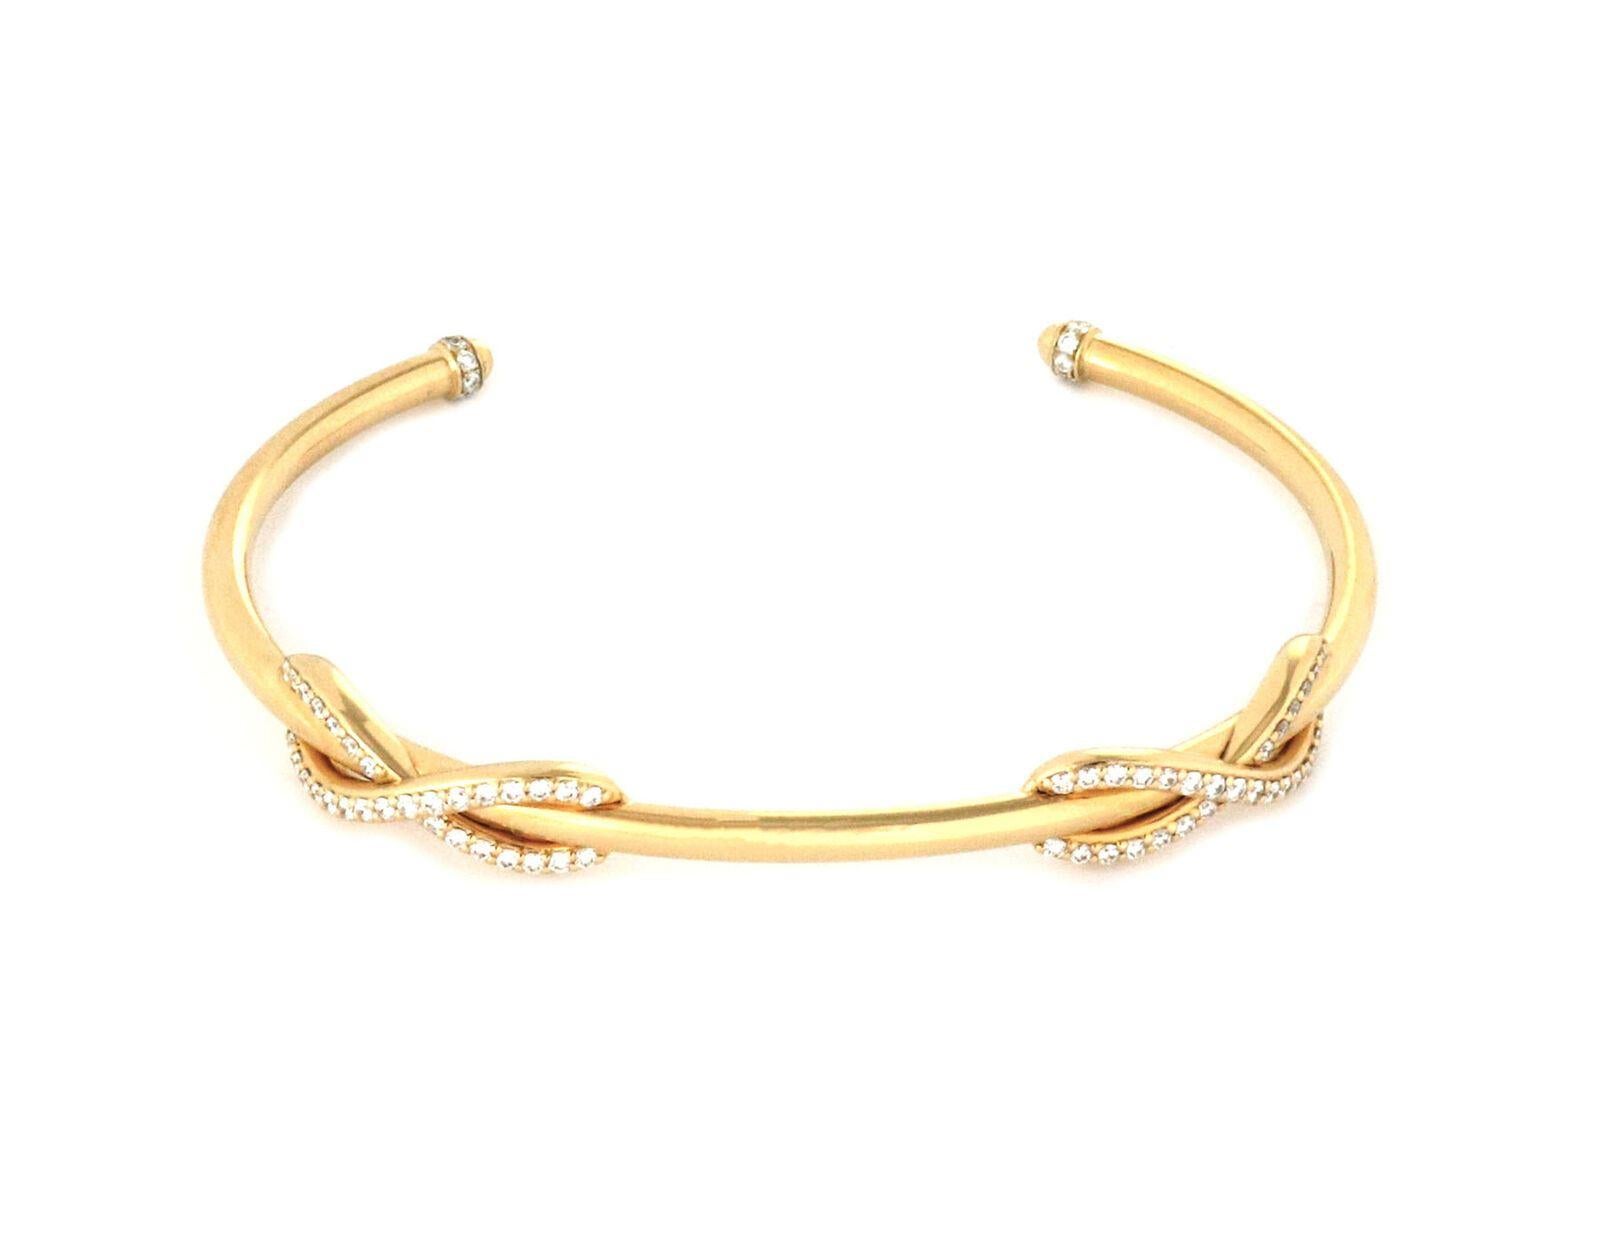 This is a gorgeous cuff bracelet by Tiffany & Co. from the Infinity Collection. It is crafted from 18k yellow gold featuring a thick wire cuff with two infinity design on the front decorated with 65 points diamonds. The two end of the bangle has